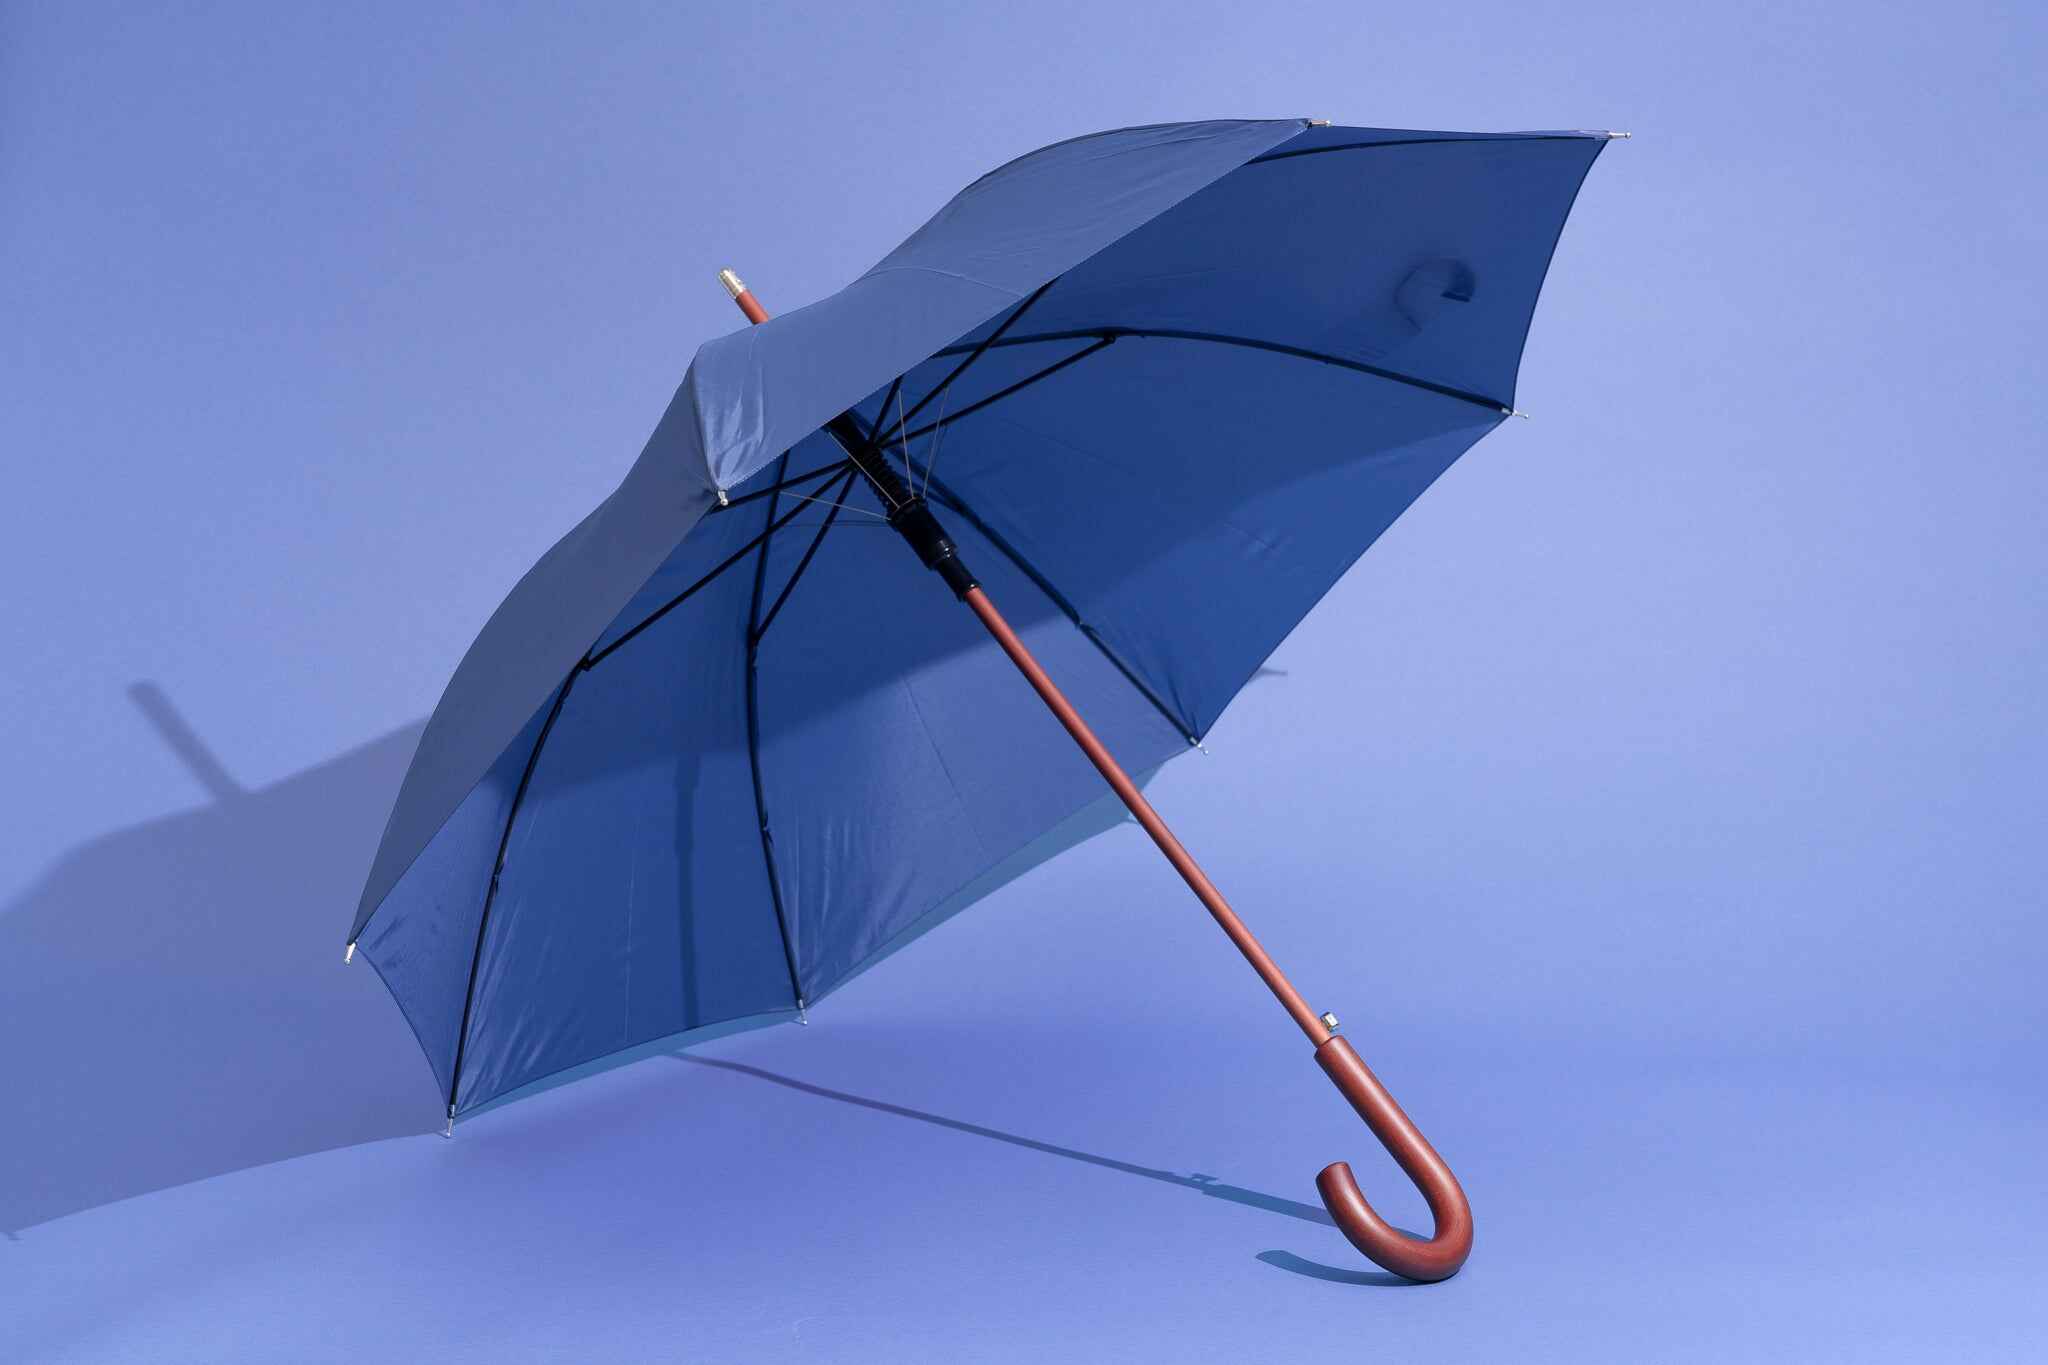 Top 10 high quality umbrellas under Rs.500 that you should buy this monsoon - 2023